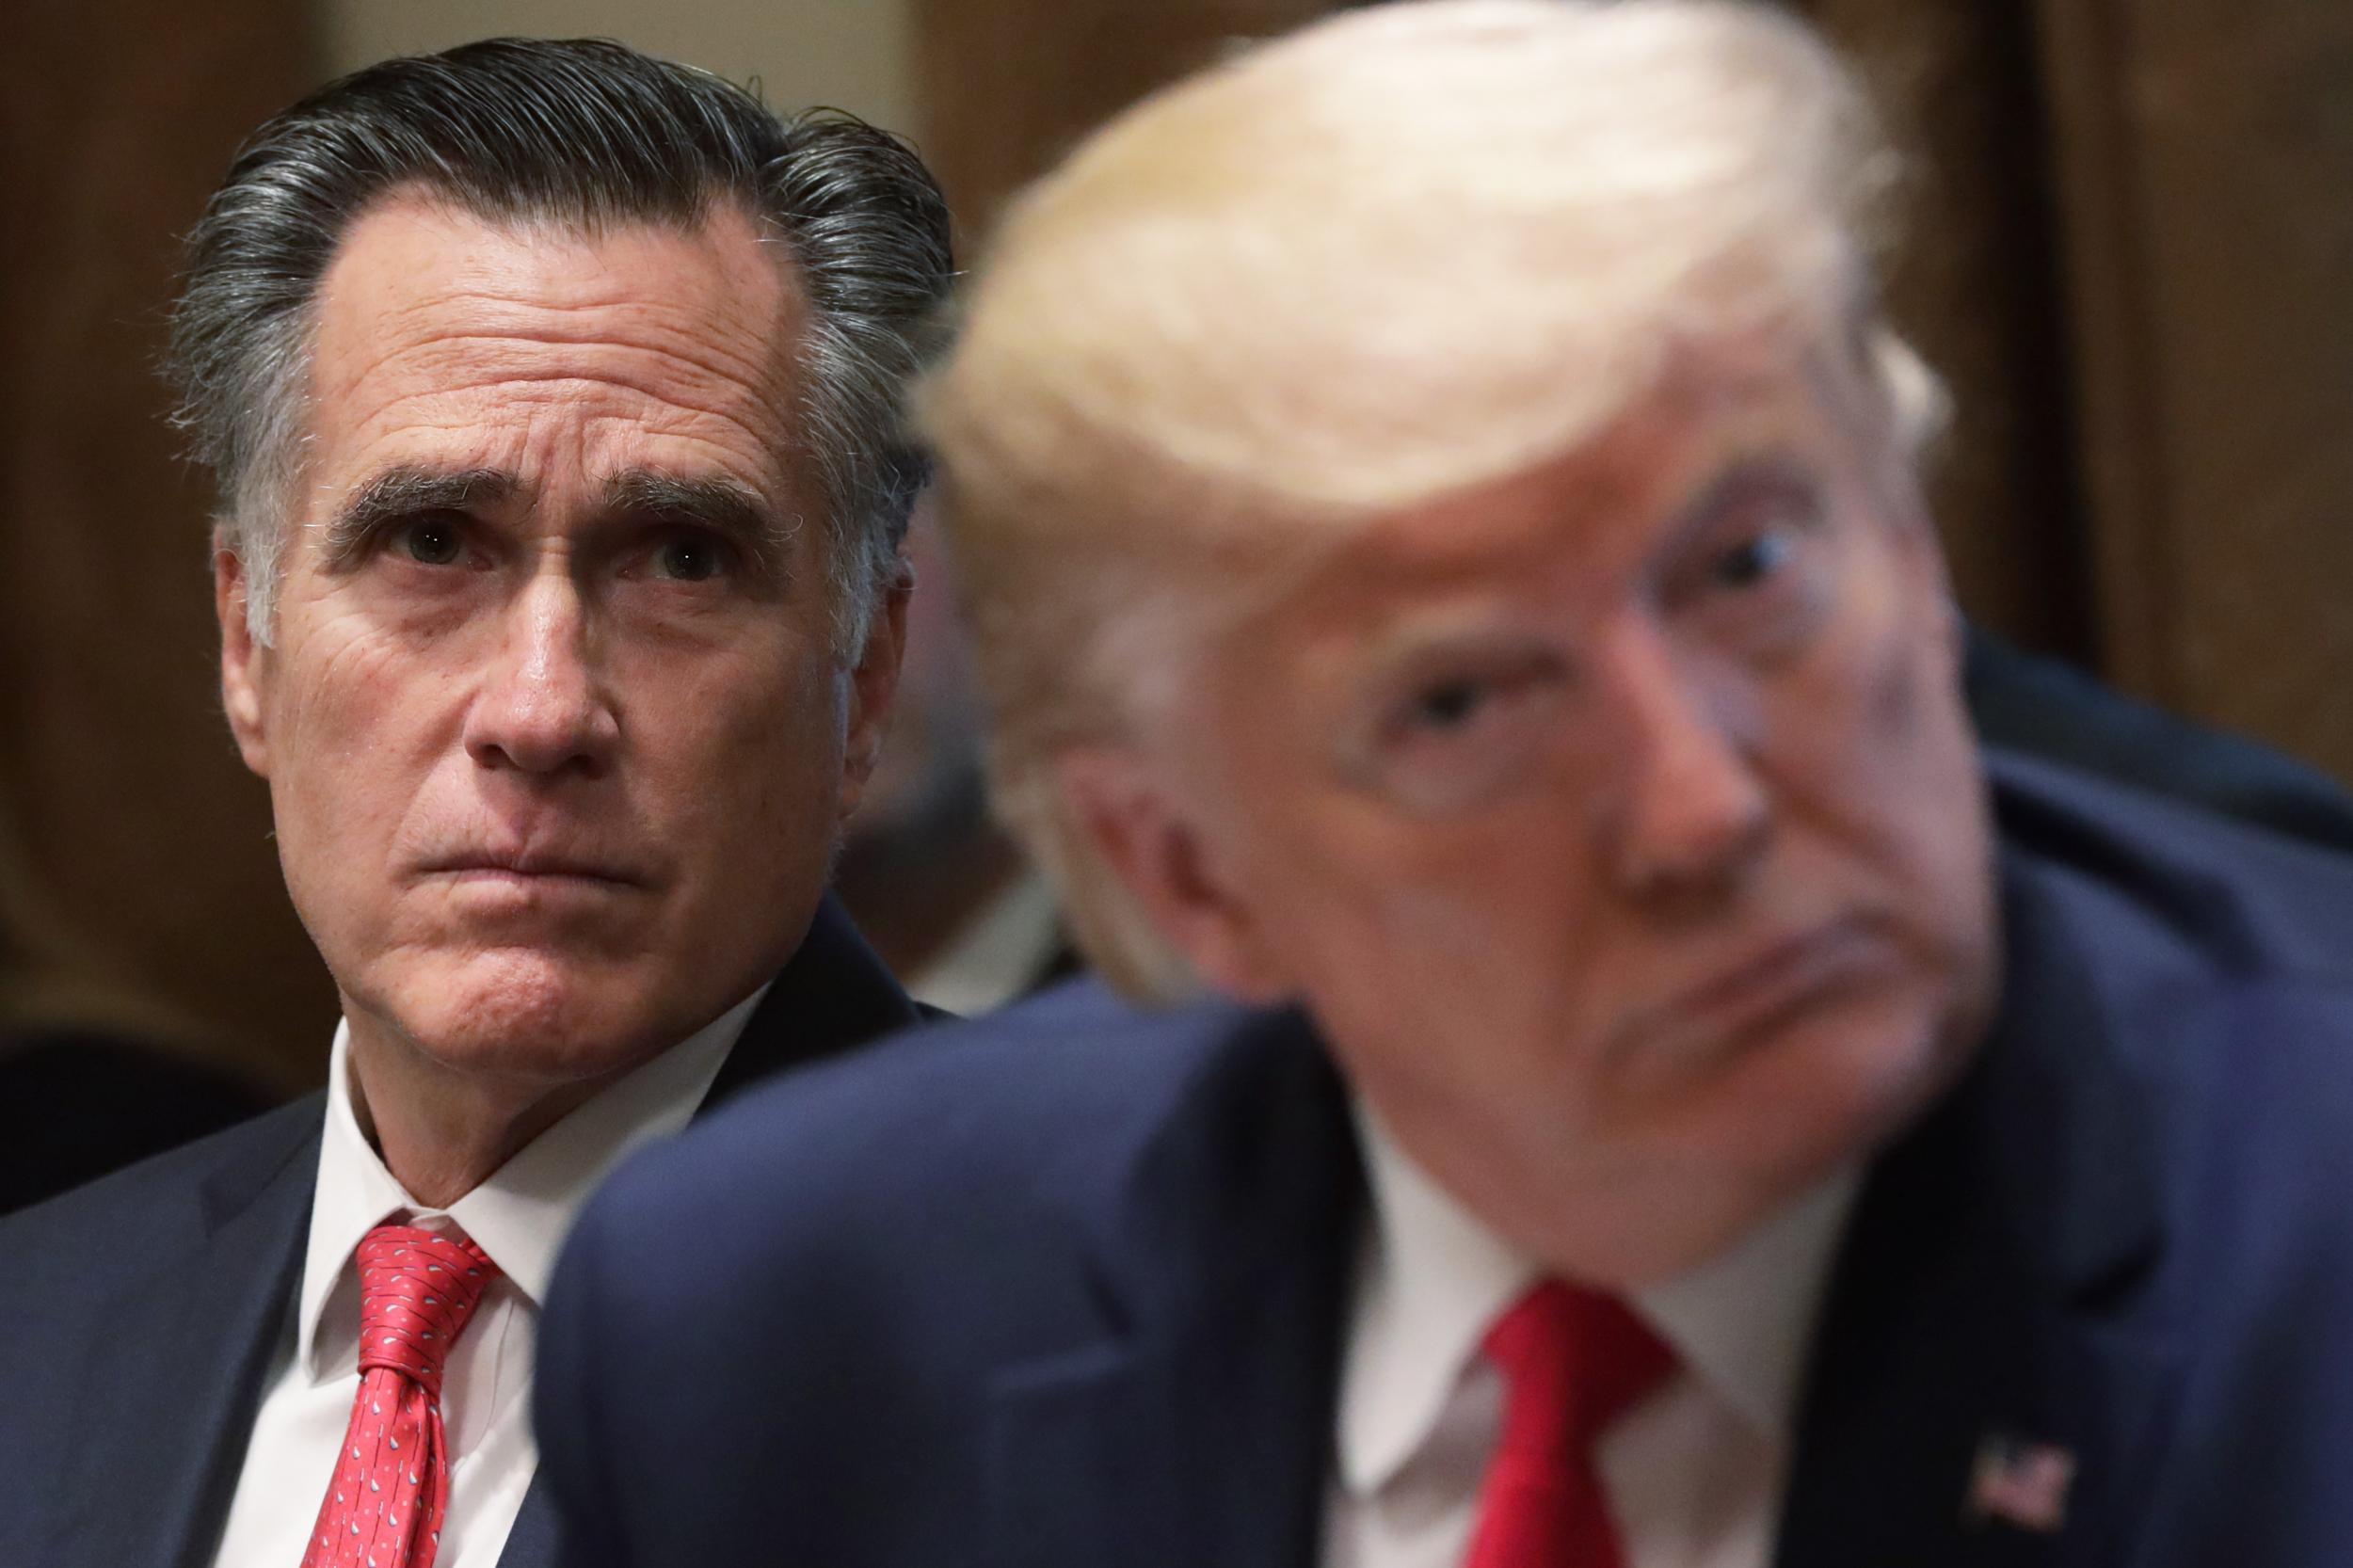 Trump promotes conspiracy theory that Romney is a Democrat 'secret asset' after he votes to convict president